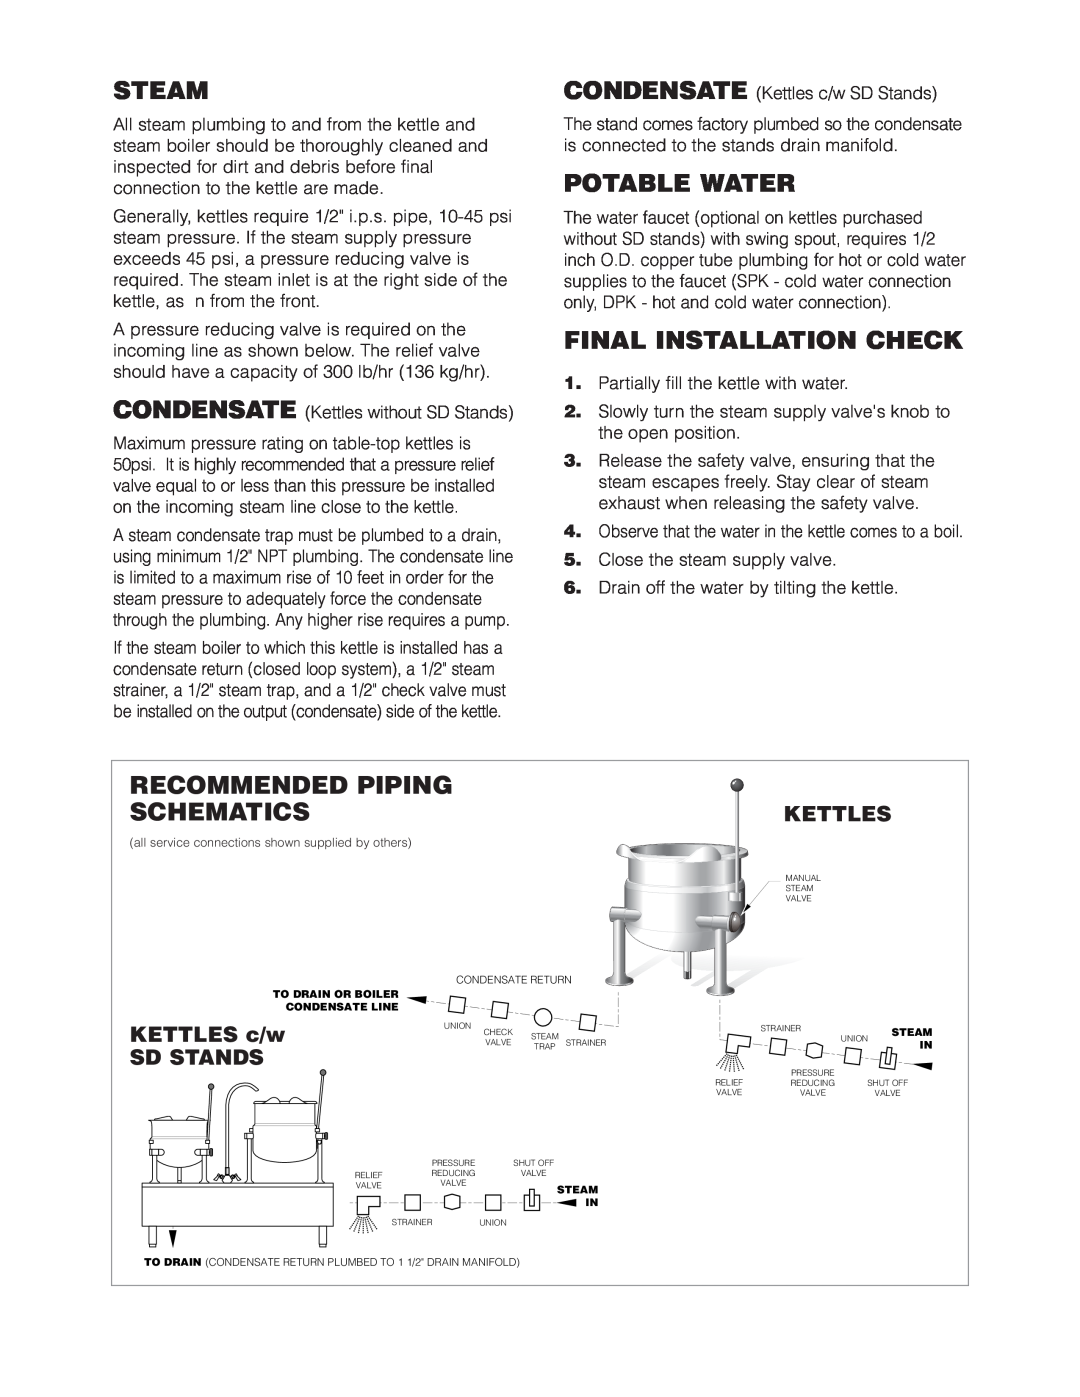 Cleveland Range SD-1600-K2020 Steam, Potable Water, Final Installation Check, Recommended Piping, Schematics, Kettles 